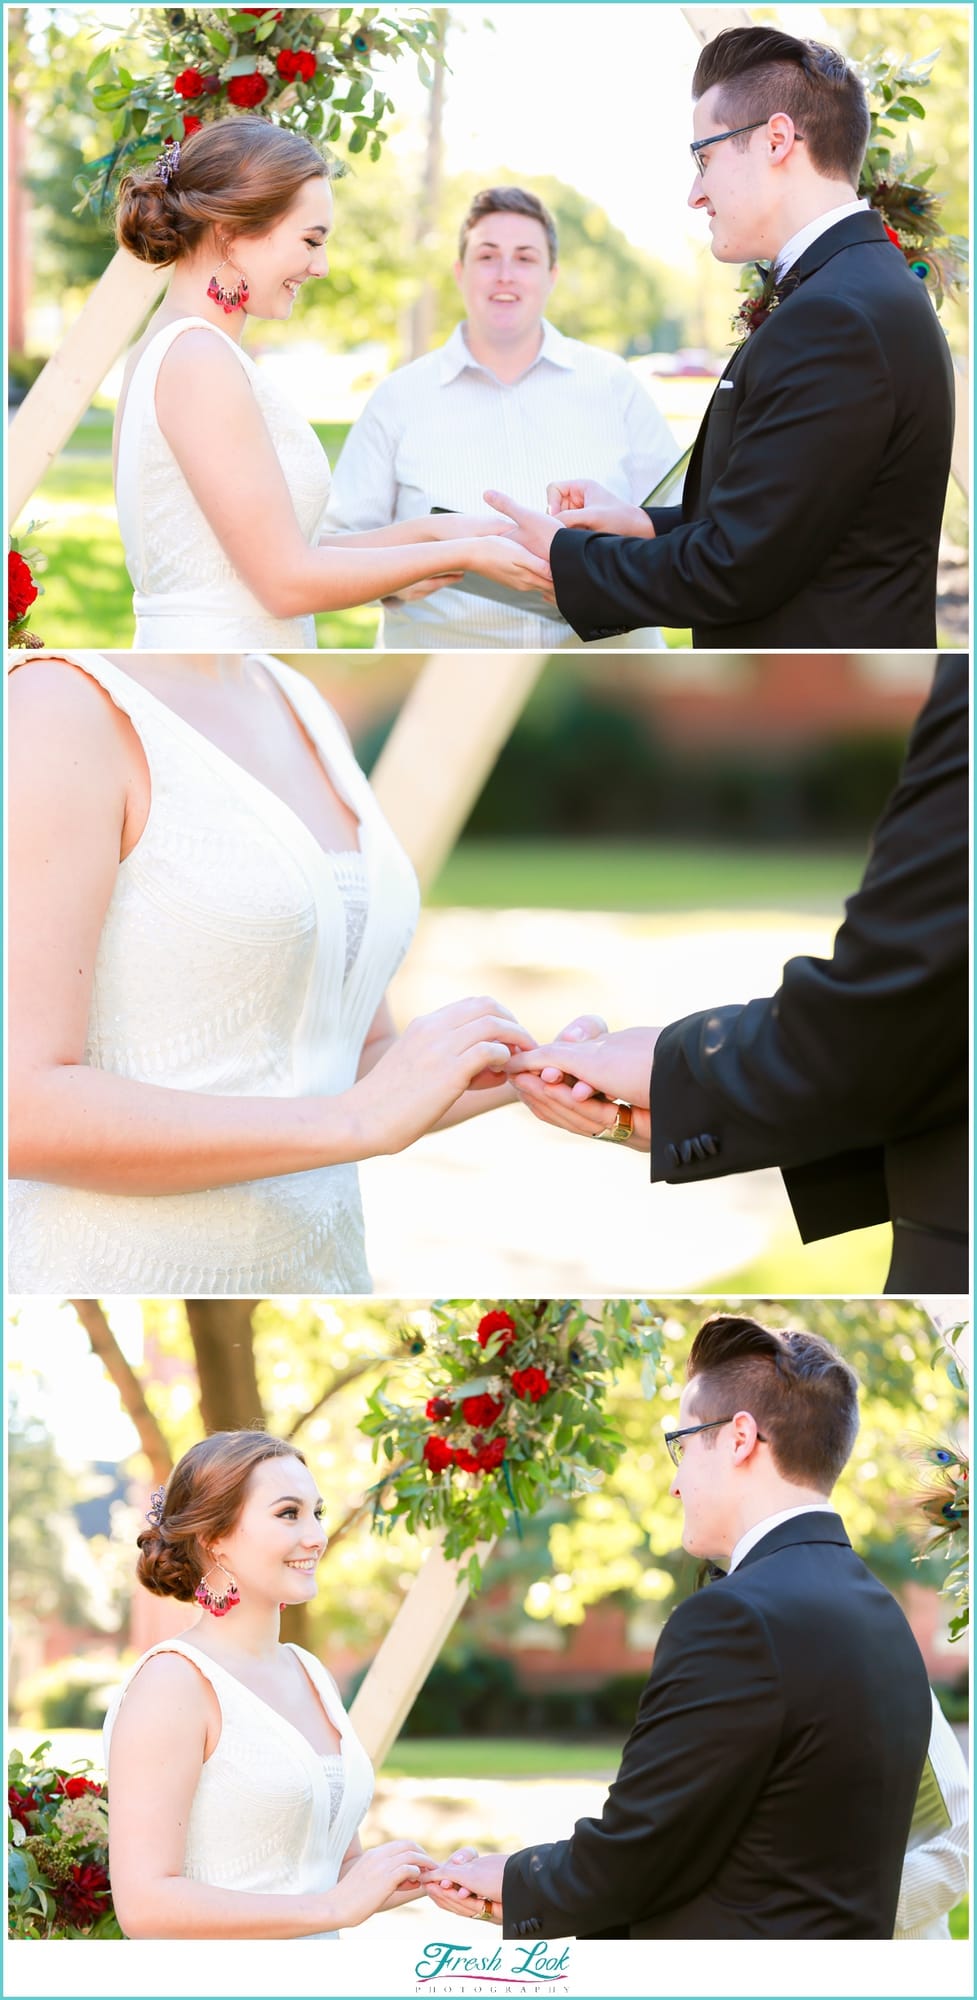 exchanging of rings at wedding ceremony